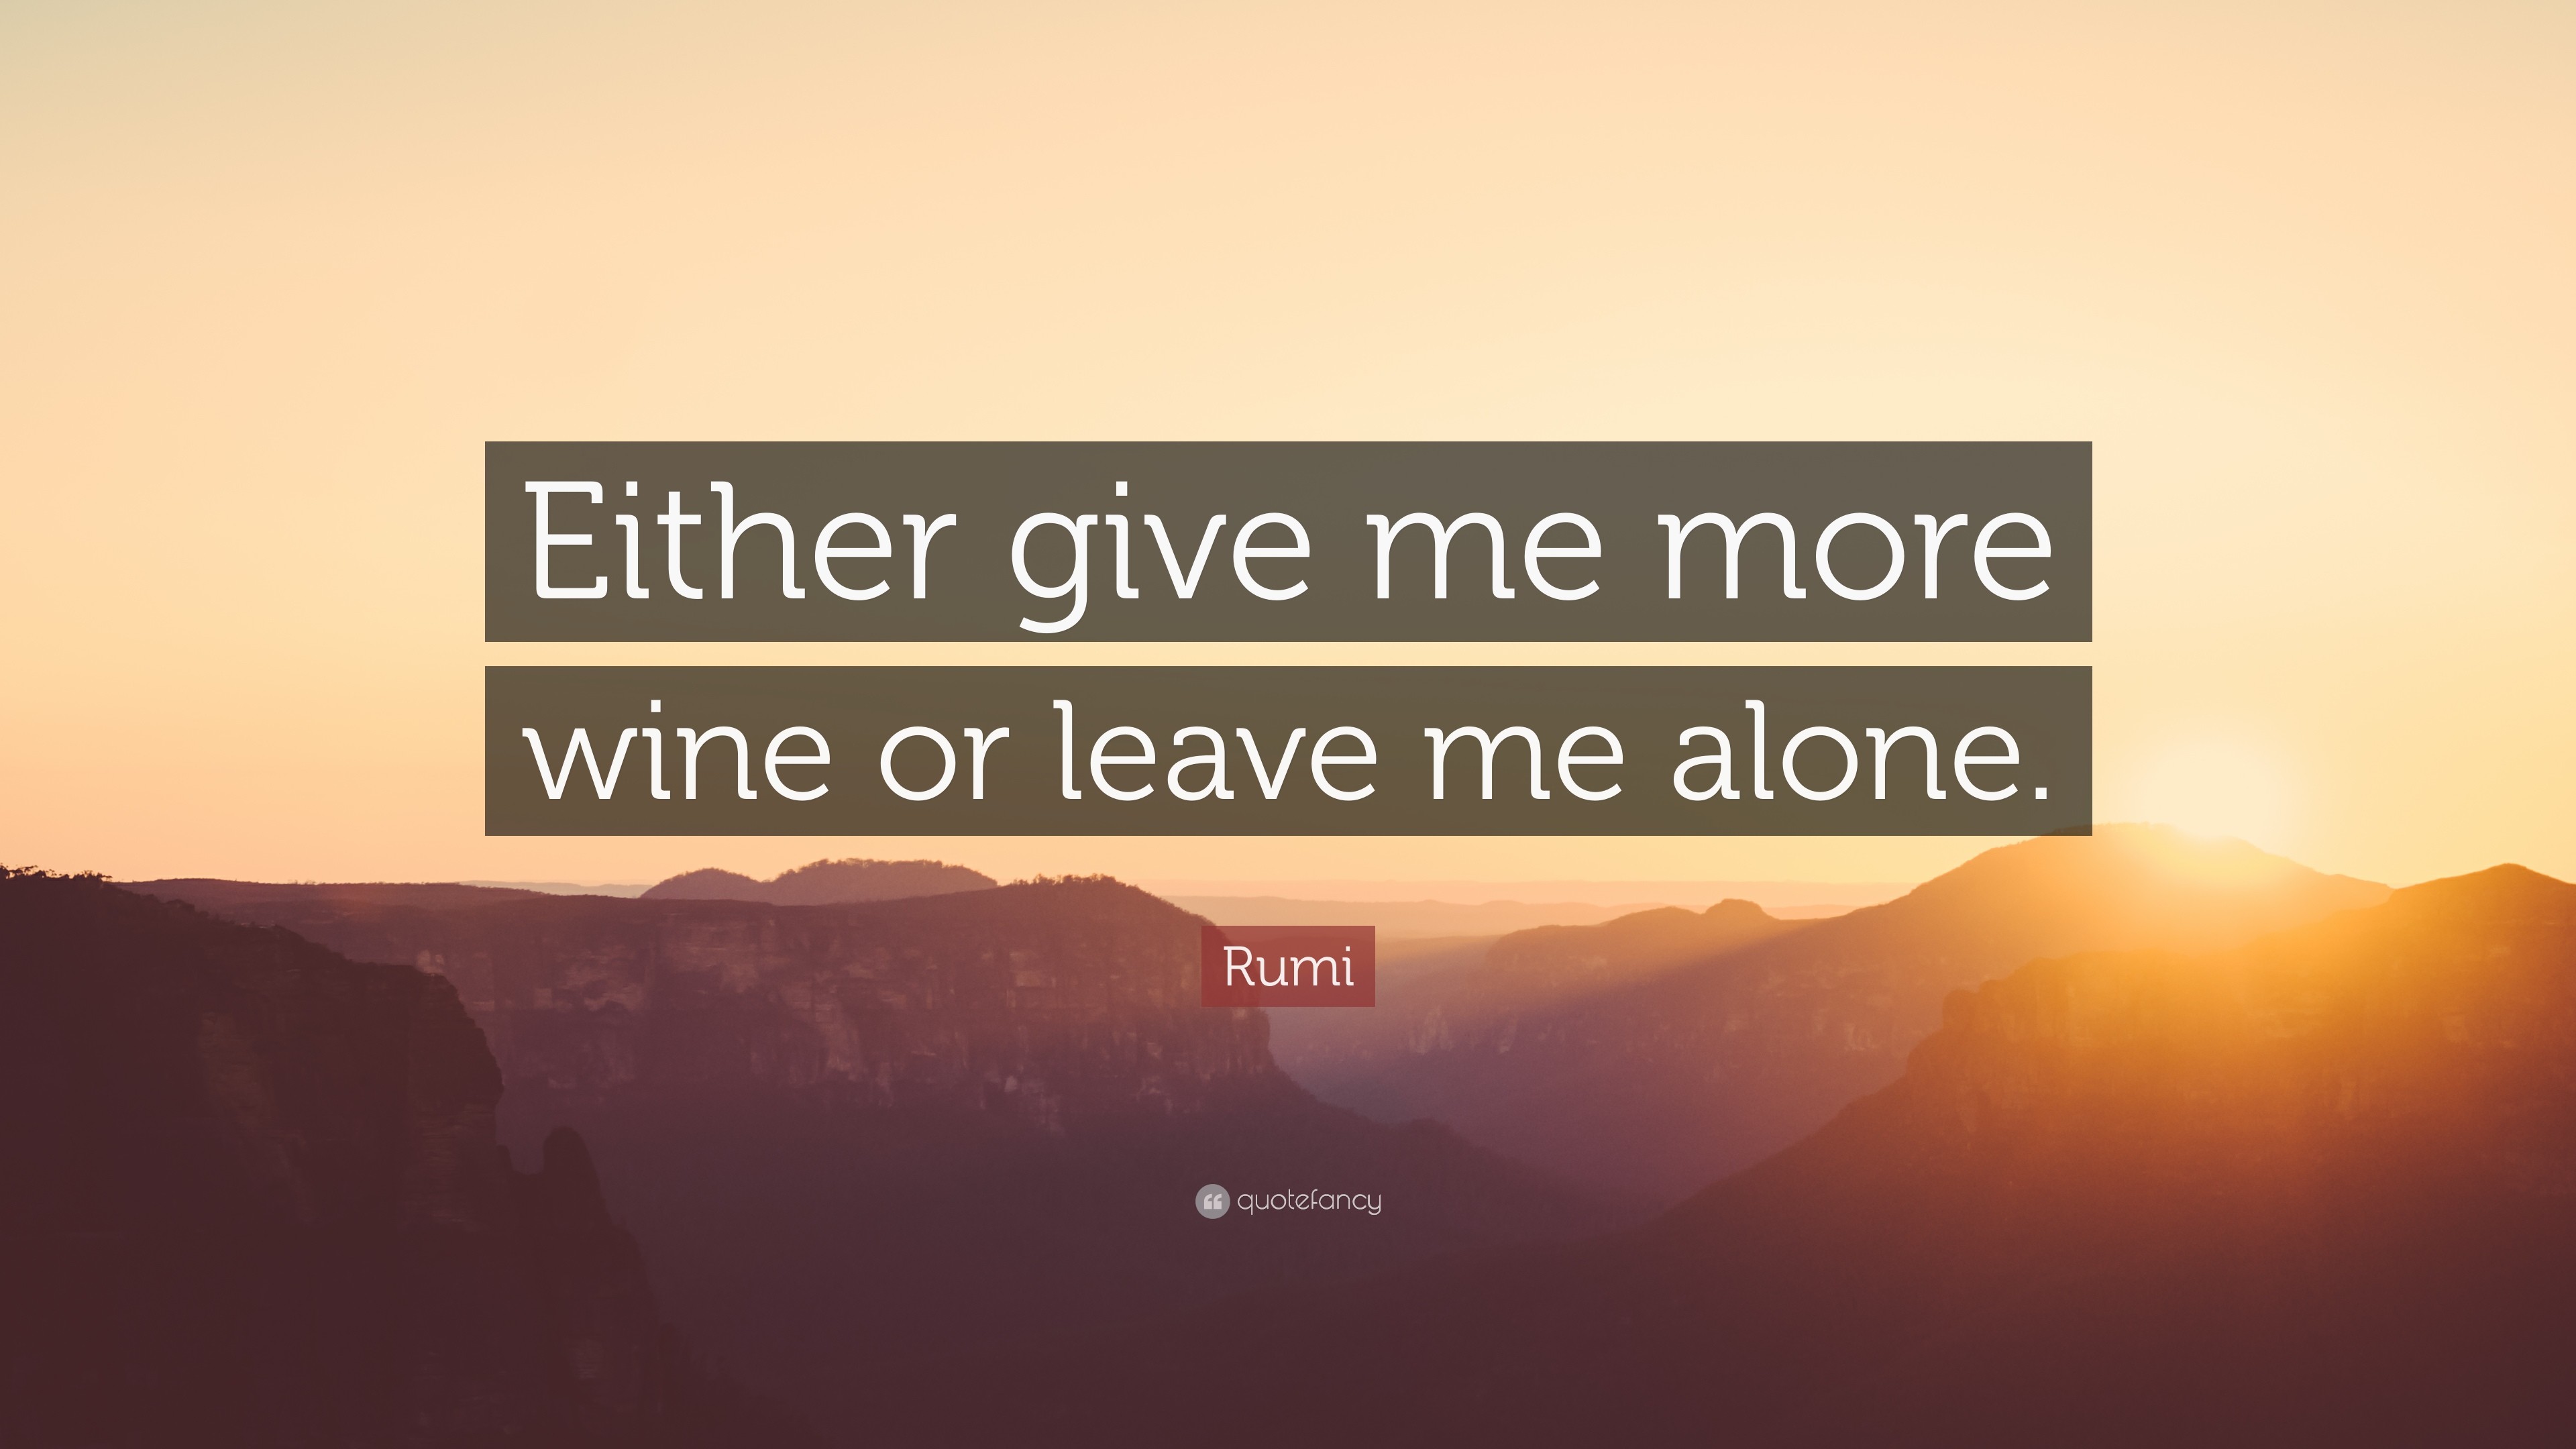 3840x2160 Rumi Quote: “Either give me more wine or leave me alone.”